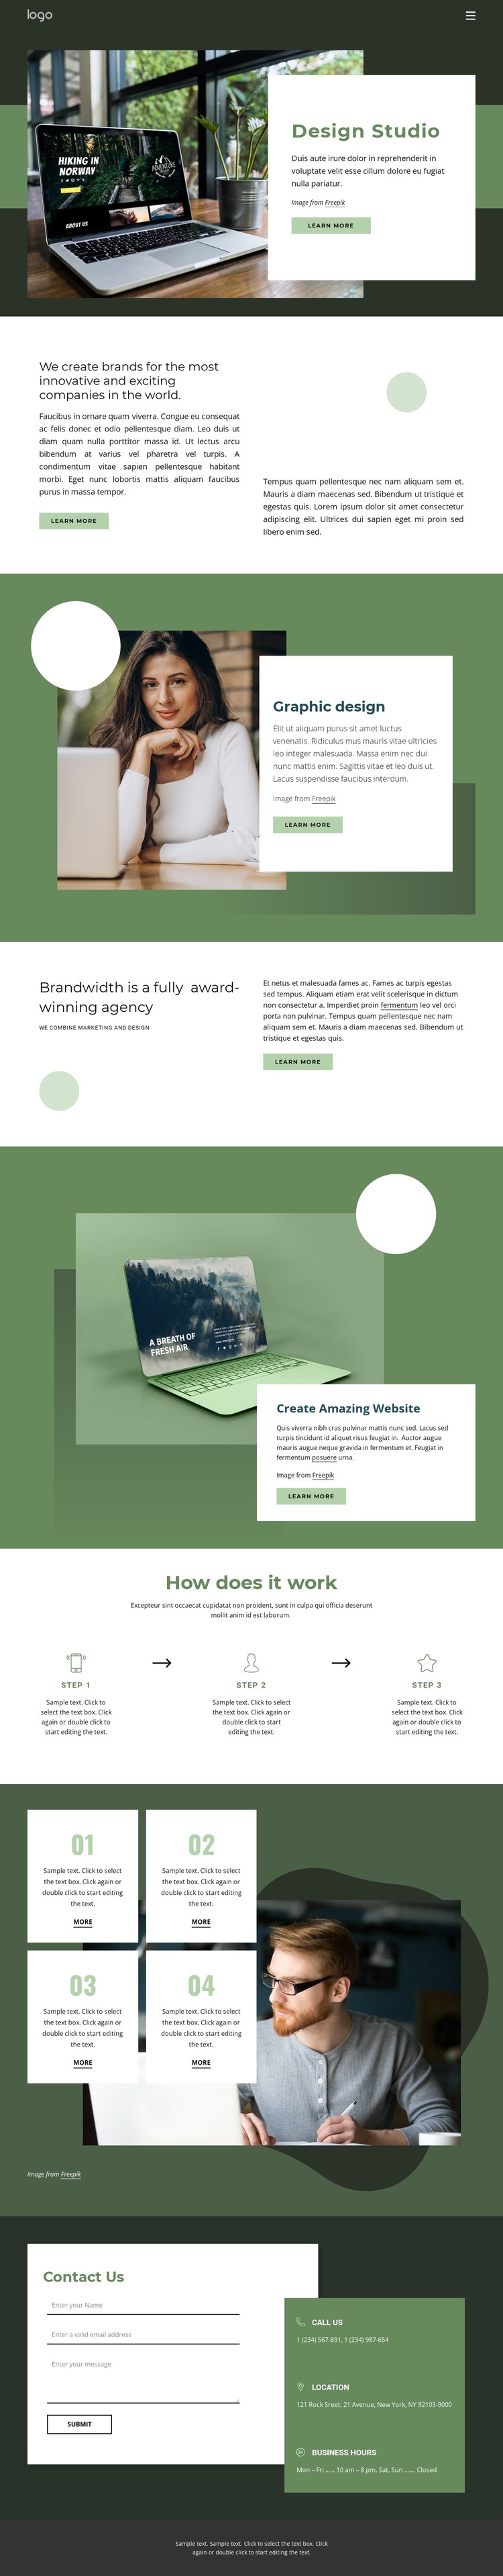 Design inspiration from nature CSS Template